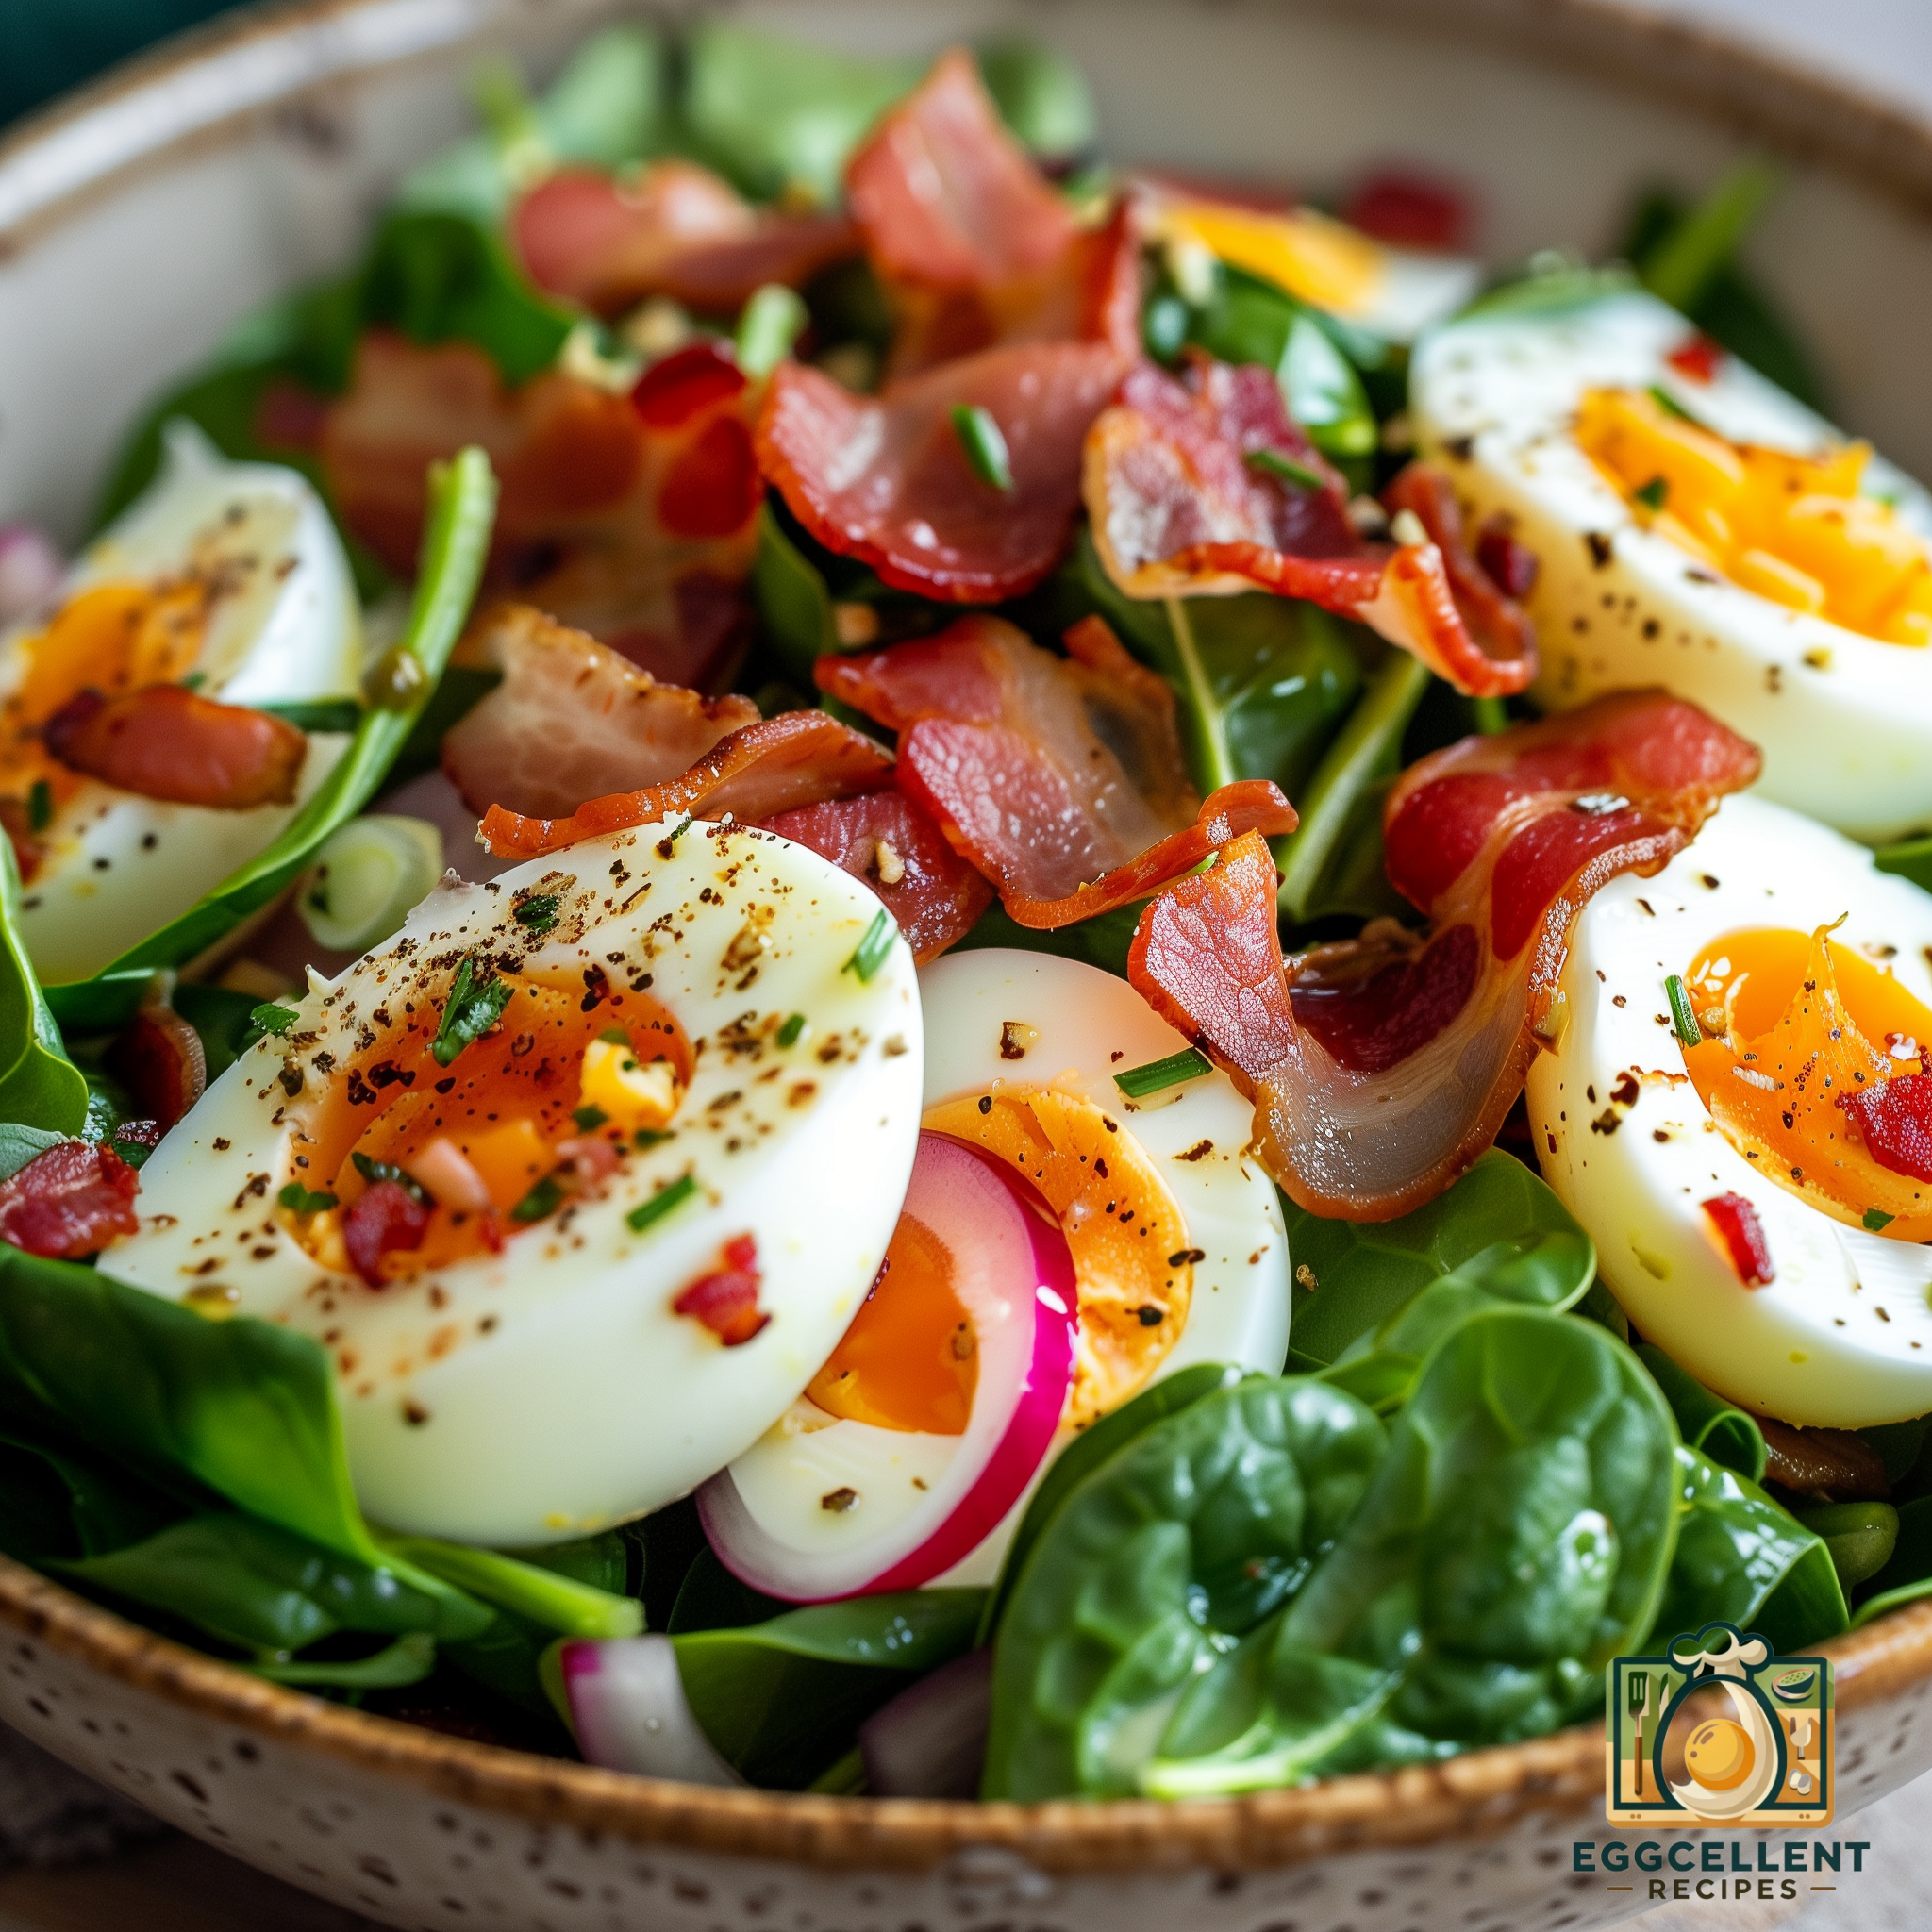 Spinach Salad with Warm Bacon Dressing Recipe